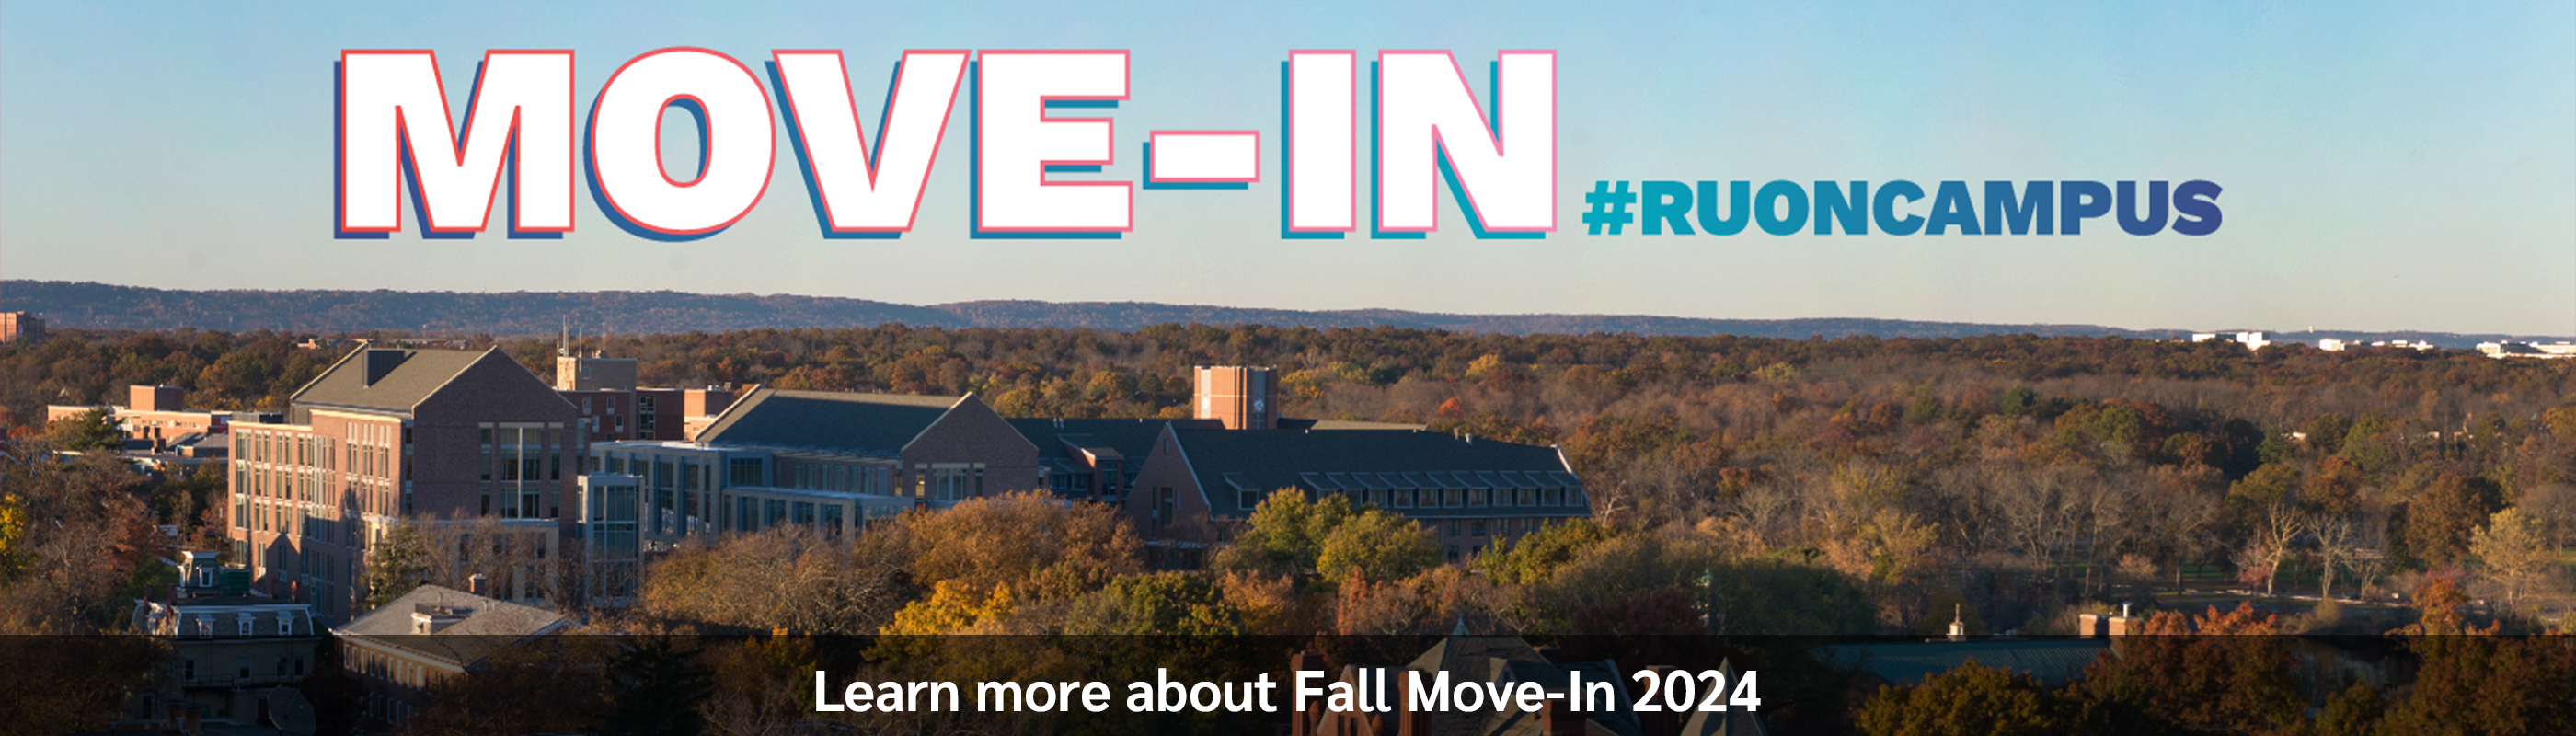 Fall Move-in banner